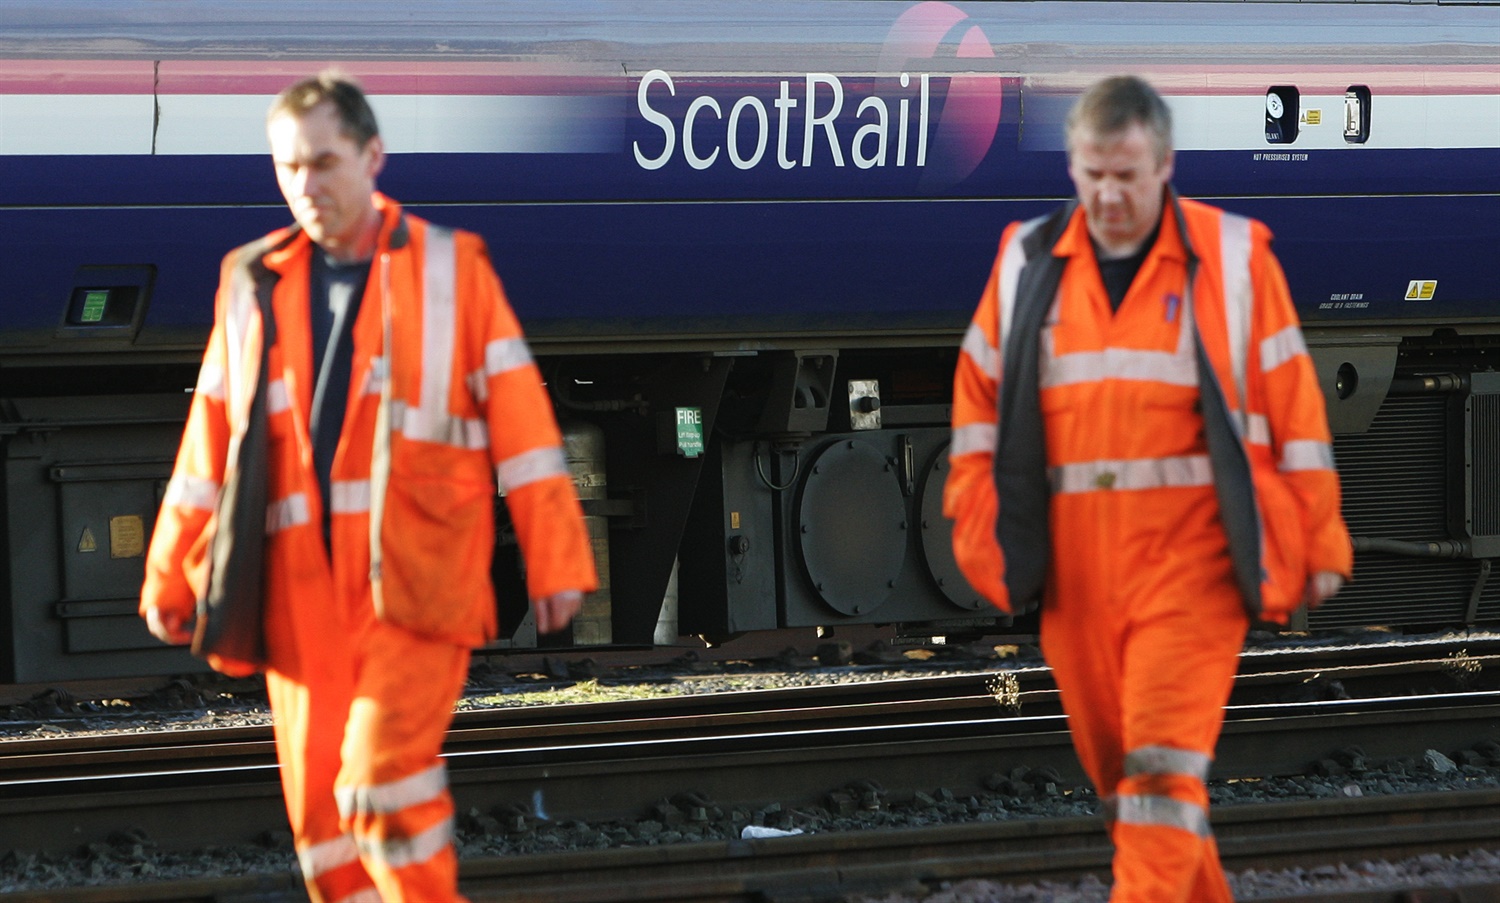 ScotRail MD in discussions with Aberdeen MSP over rail performance issues